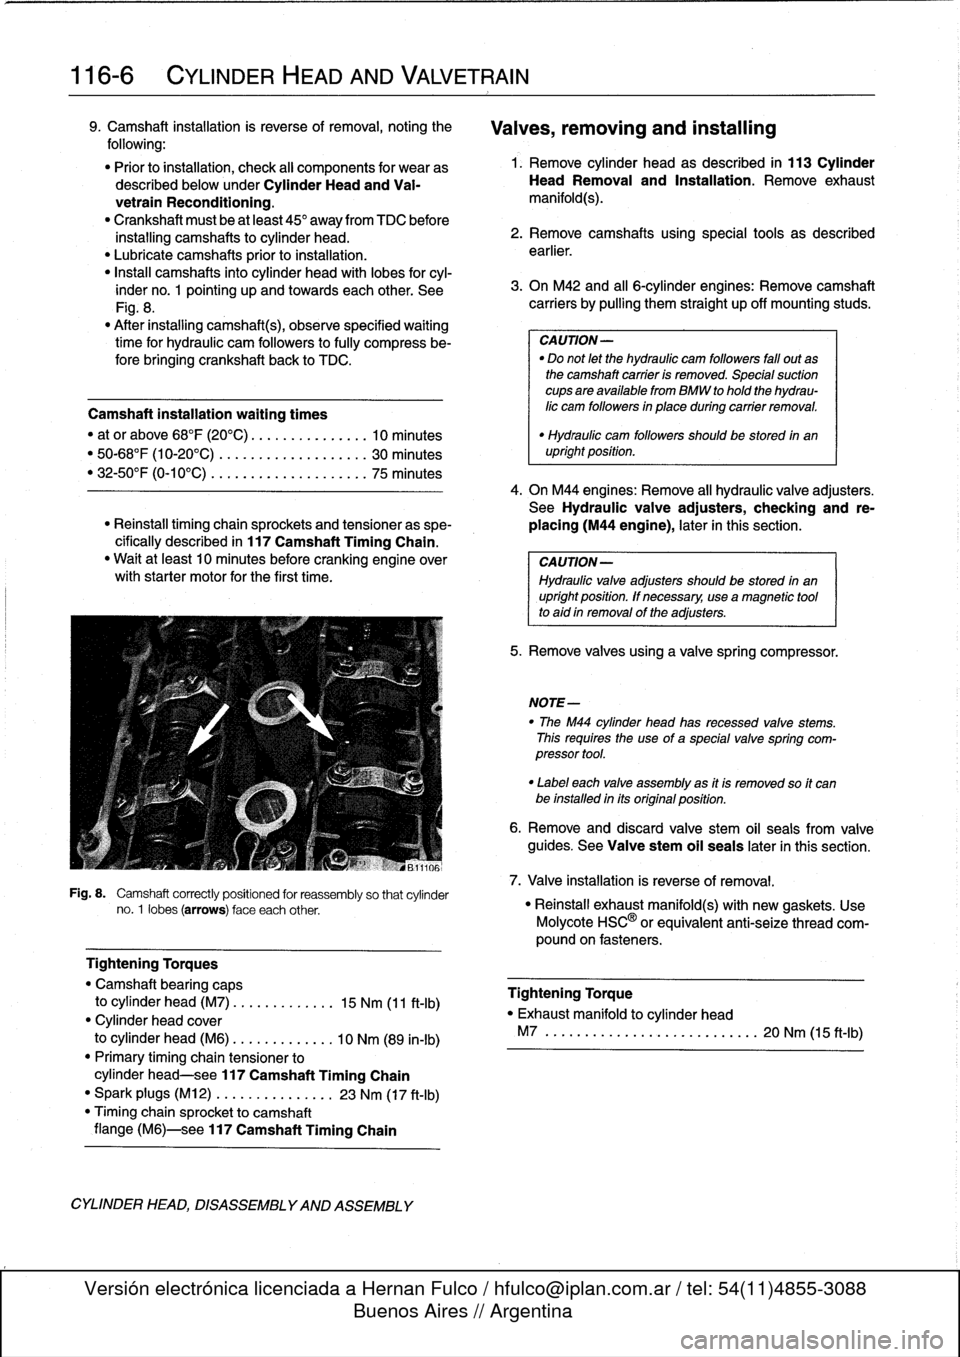 BMW 323i 1997 E36 Manual PDF 
116-
6

	

CYLINDER
HEAD
AND
VALVETRAIN

9
.
Camshaft
installation
is
reverse
of
removal,noting
the

following
:

"
Prior
to
installation,
check
al¡
components
for
wear
as
described
below
under
Cyli